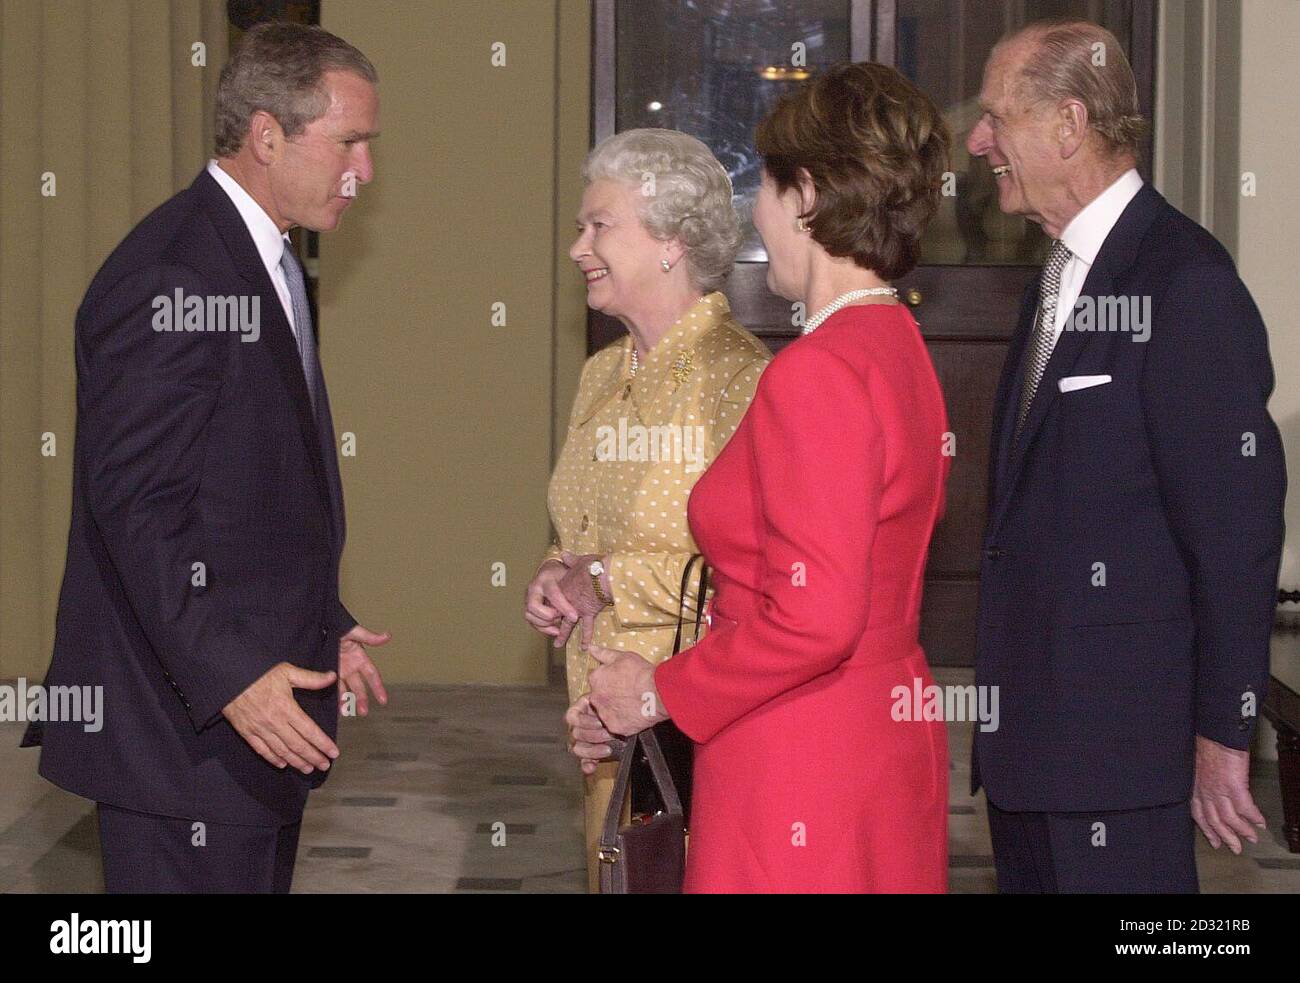 America's President Bush (left) talks to Britain's Queen Elizabeth II and the Duke of Edinbugh as he arrives with his wife, Laura, at Buckingham Palace, Thursday July 19, 2001, for lunch.  The US president is on his first visit to the United Kingdom, before travelling on to the G8 summit in Genoa.  See PA story POLITICS Bush.  PA photo: Stefan Rousseau. WPA Rota/PA Stock Photo